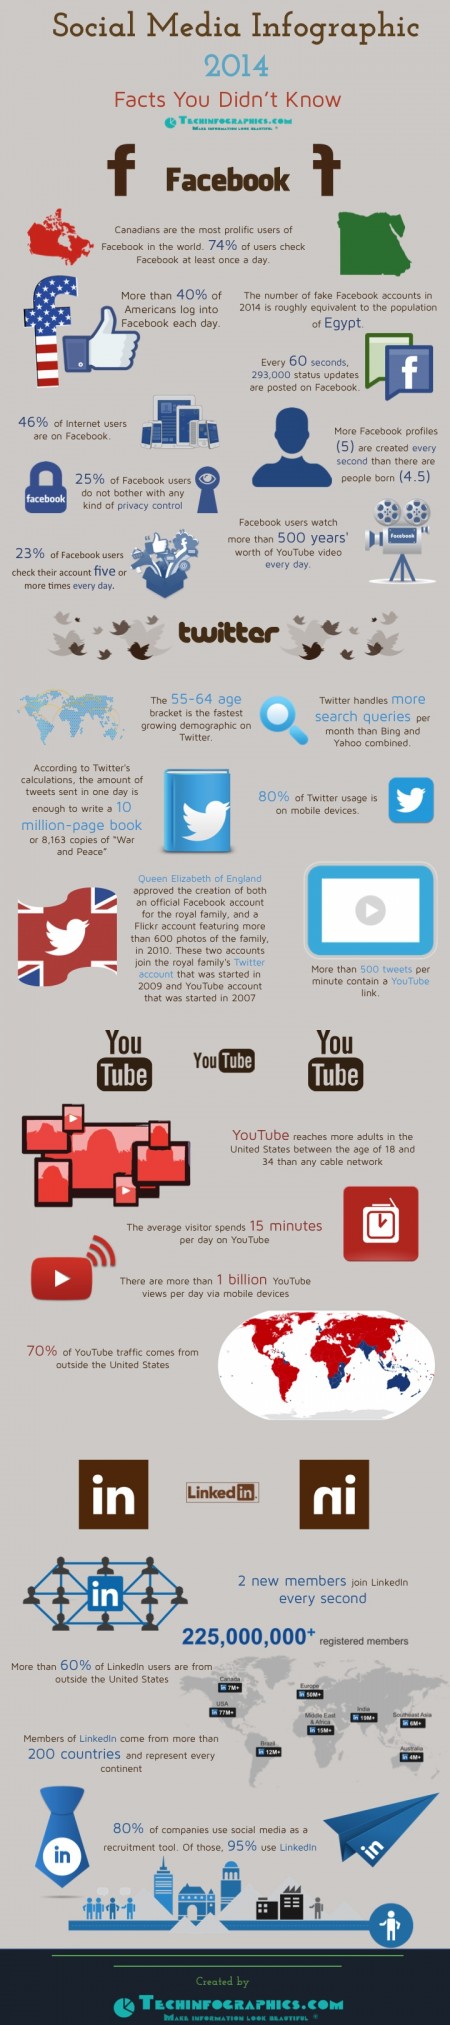 15 Social-media-infographic-2014-facts-and-statistics